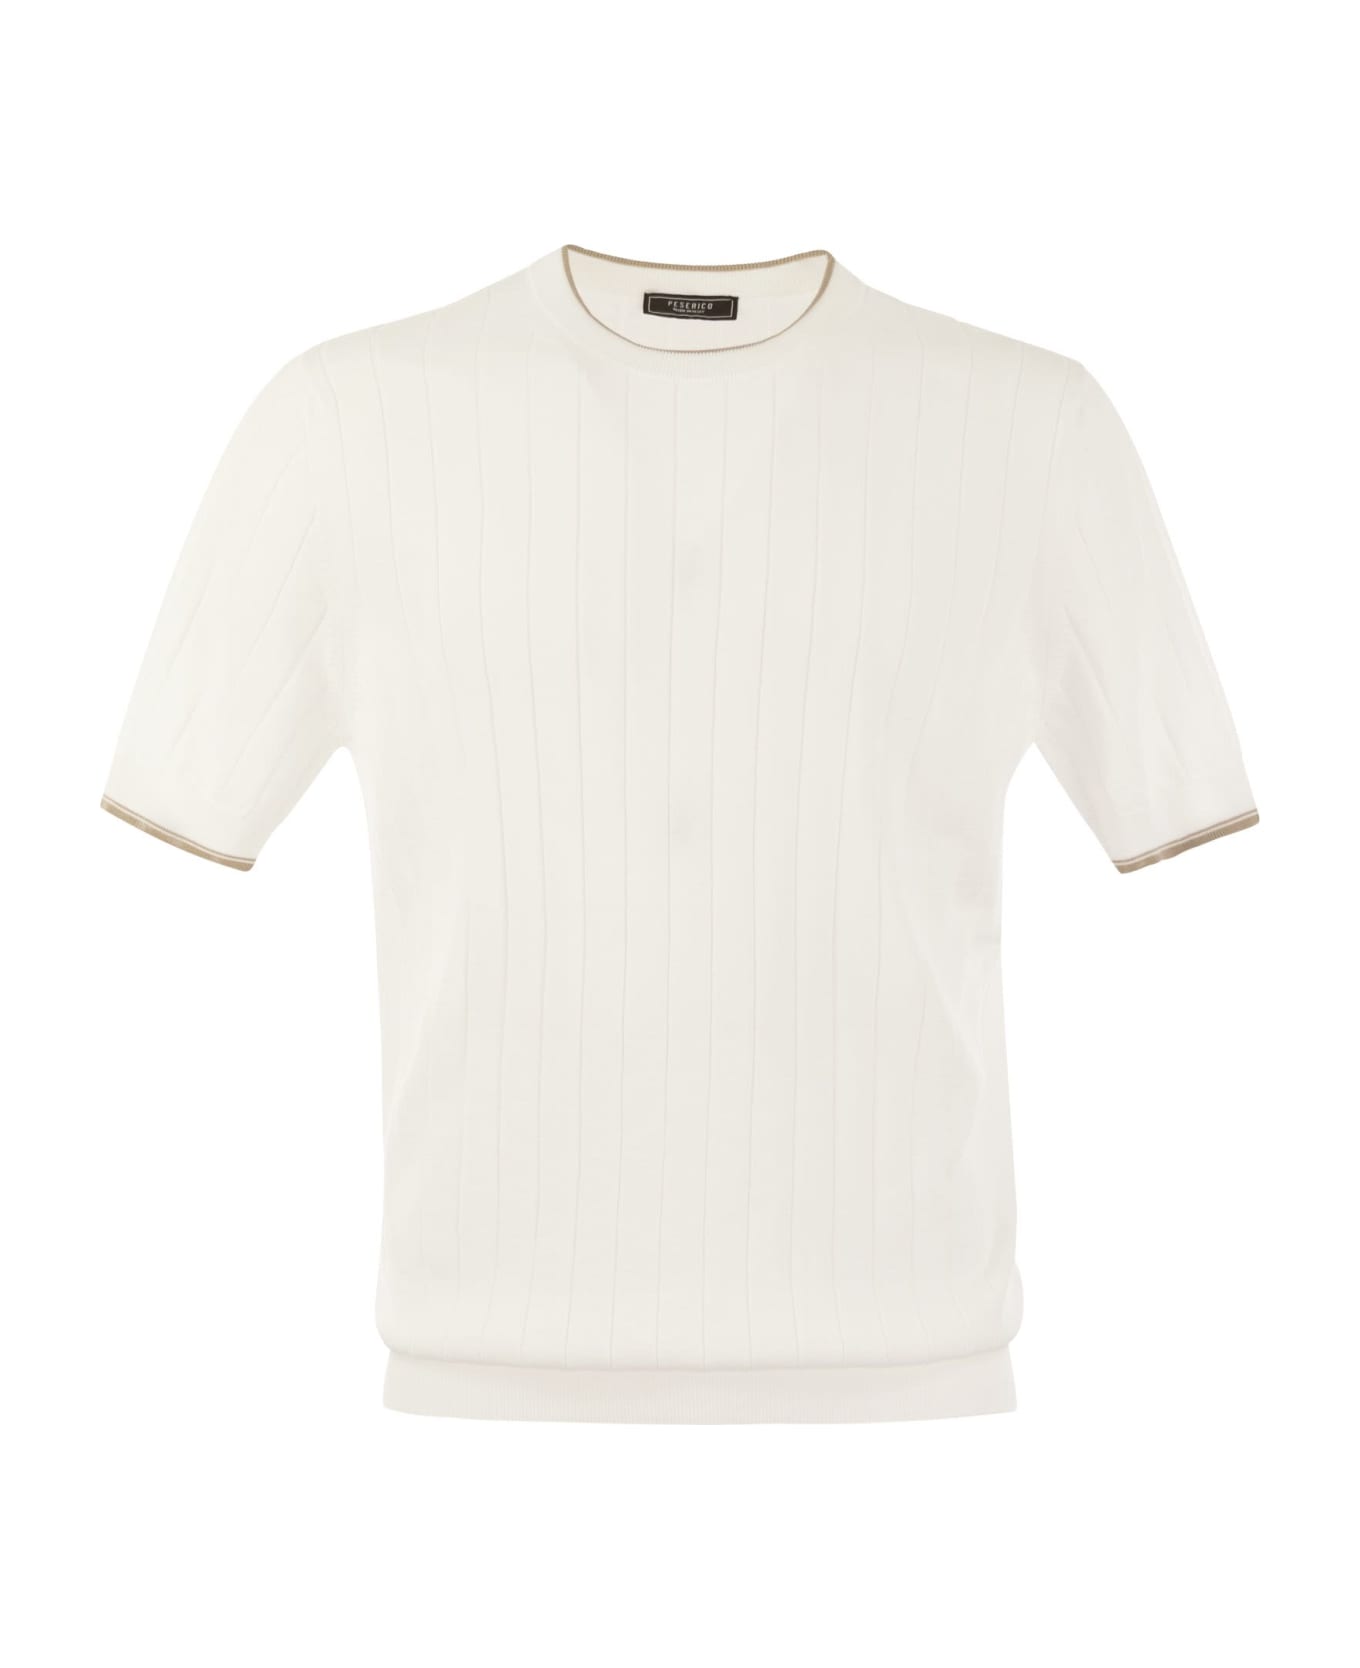 Peserico T-shirt In Pure Cotton Crépe Yarn - White/beige シャツ